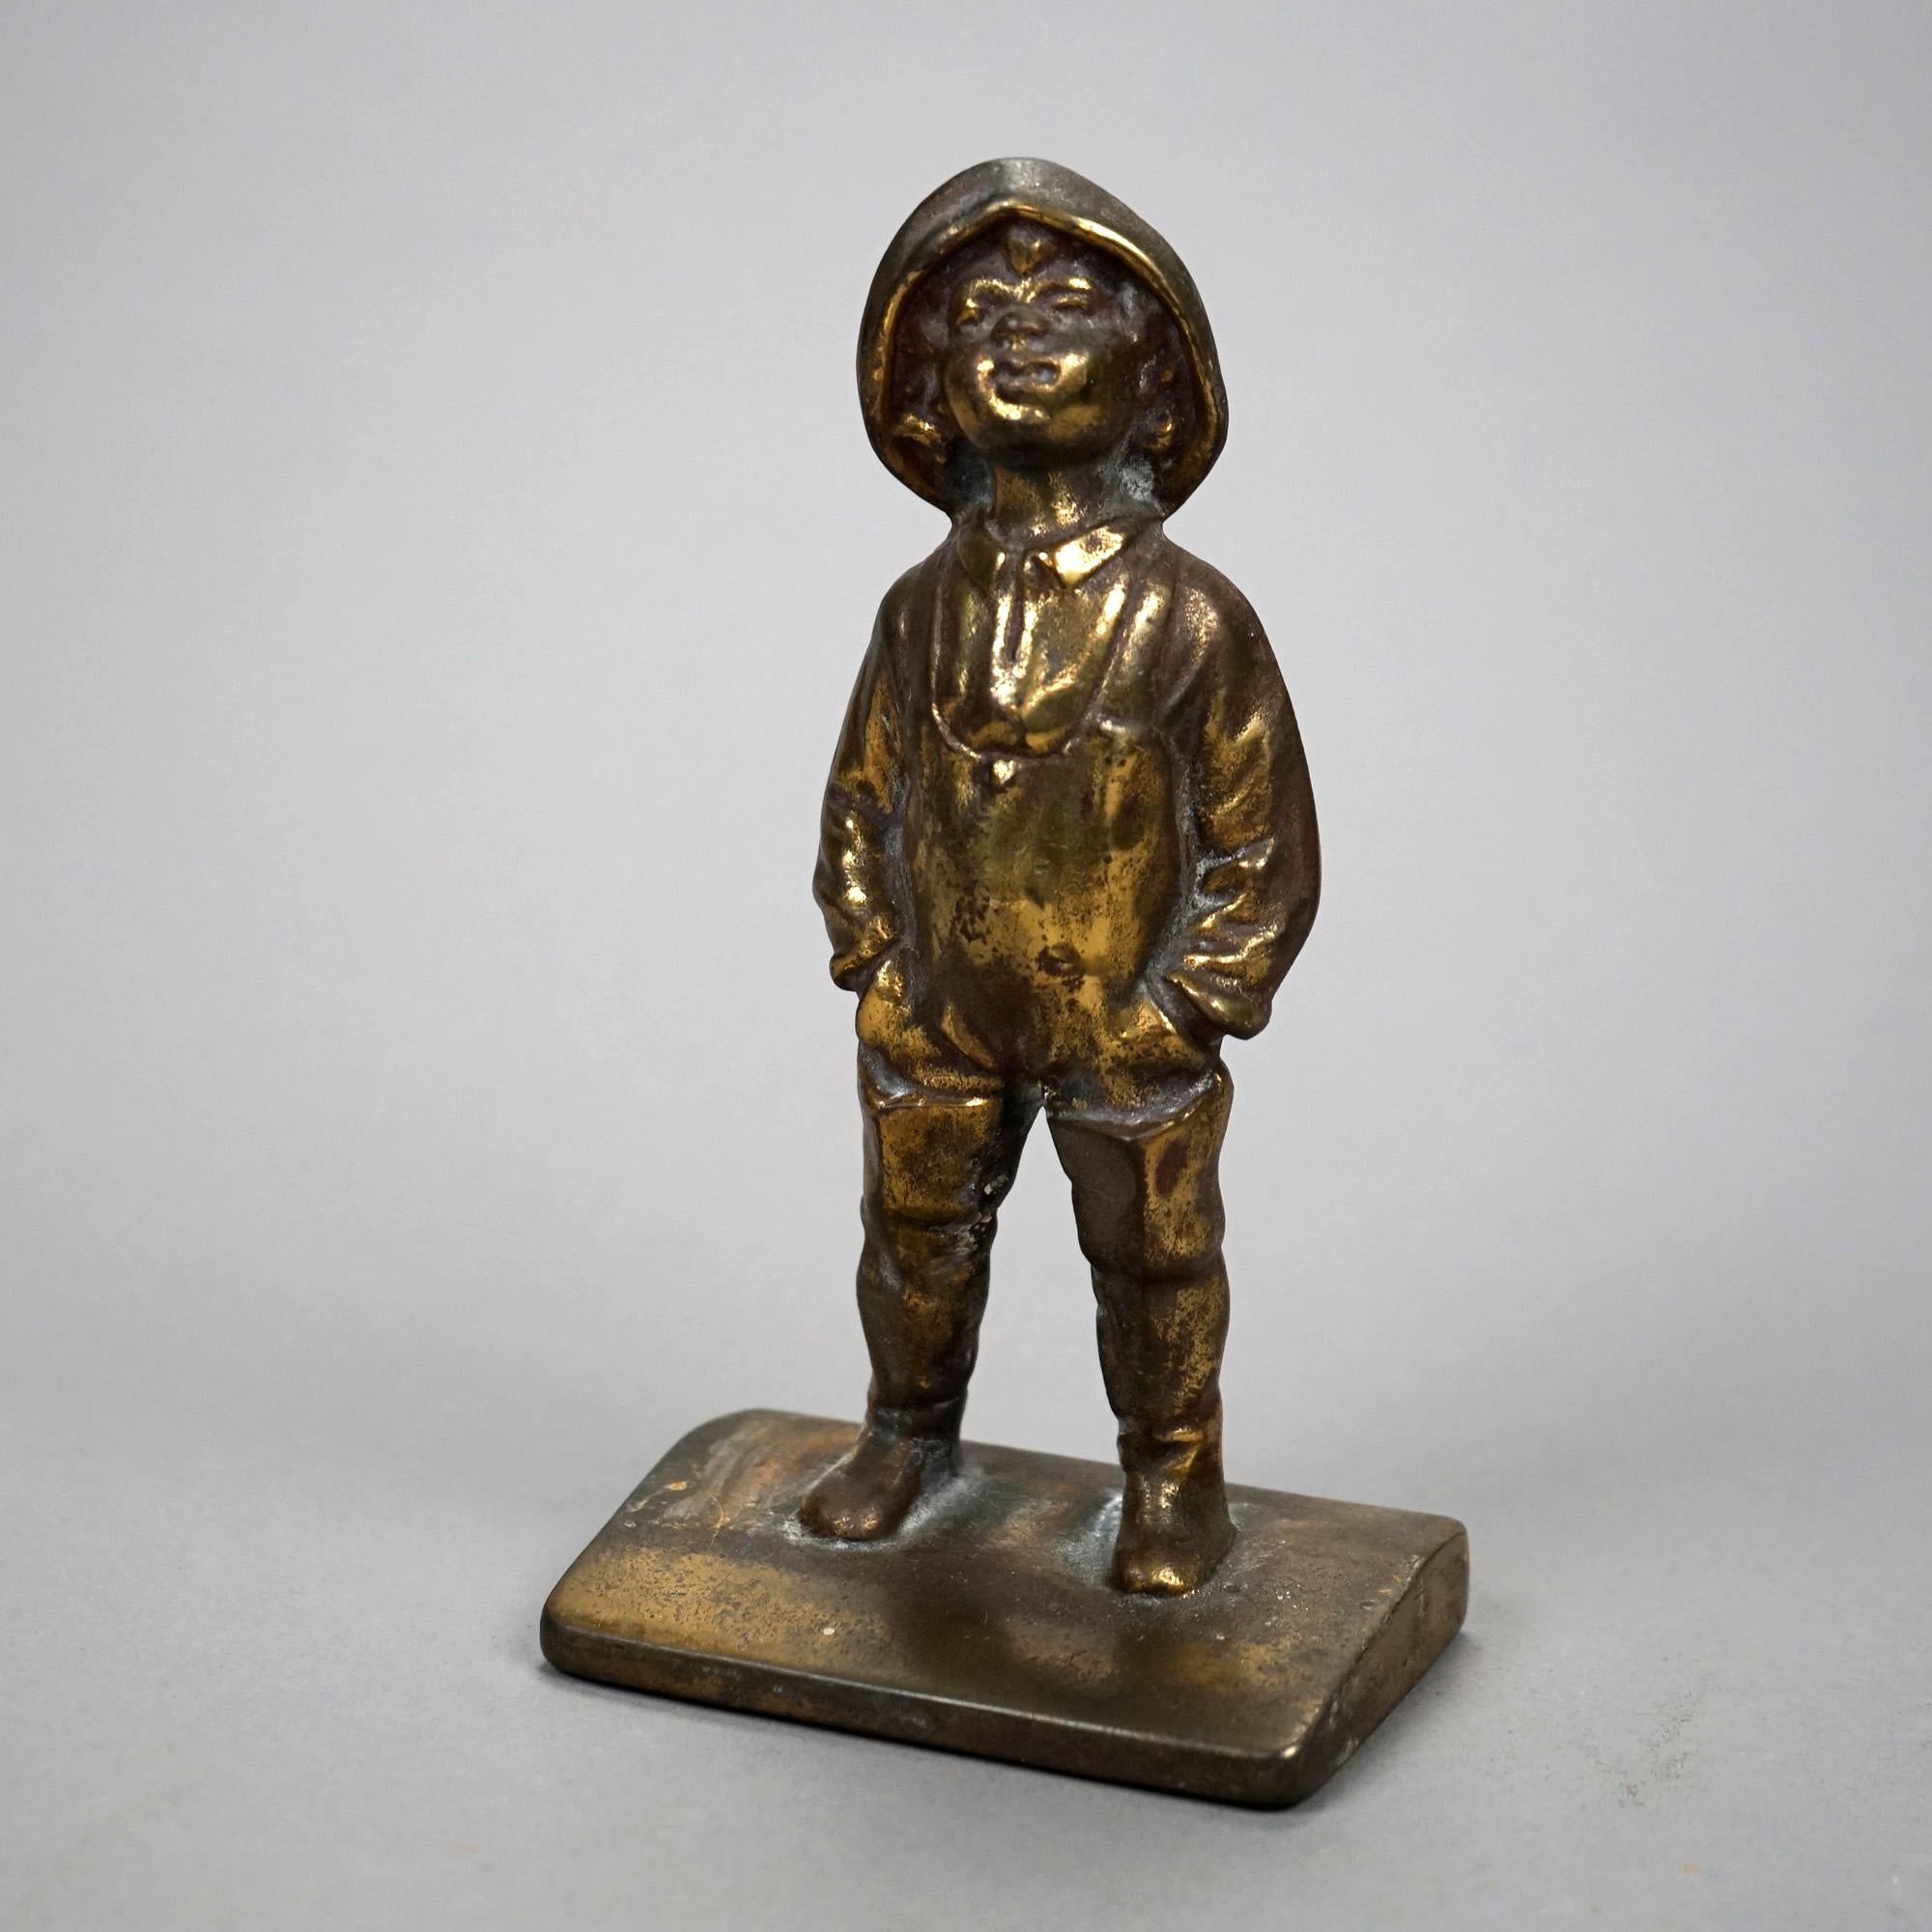 An antique pair of figural bookends offer bronzed cast metal sculpture of young boy street urchin, c1920

Measures- 7''H x 4''W x 2.5''D

Catalogue Note: Ask about DISCOUNTED DELIVERY RATES available to most regions within 1,500 miles of New York.